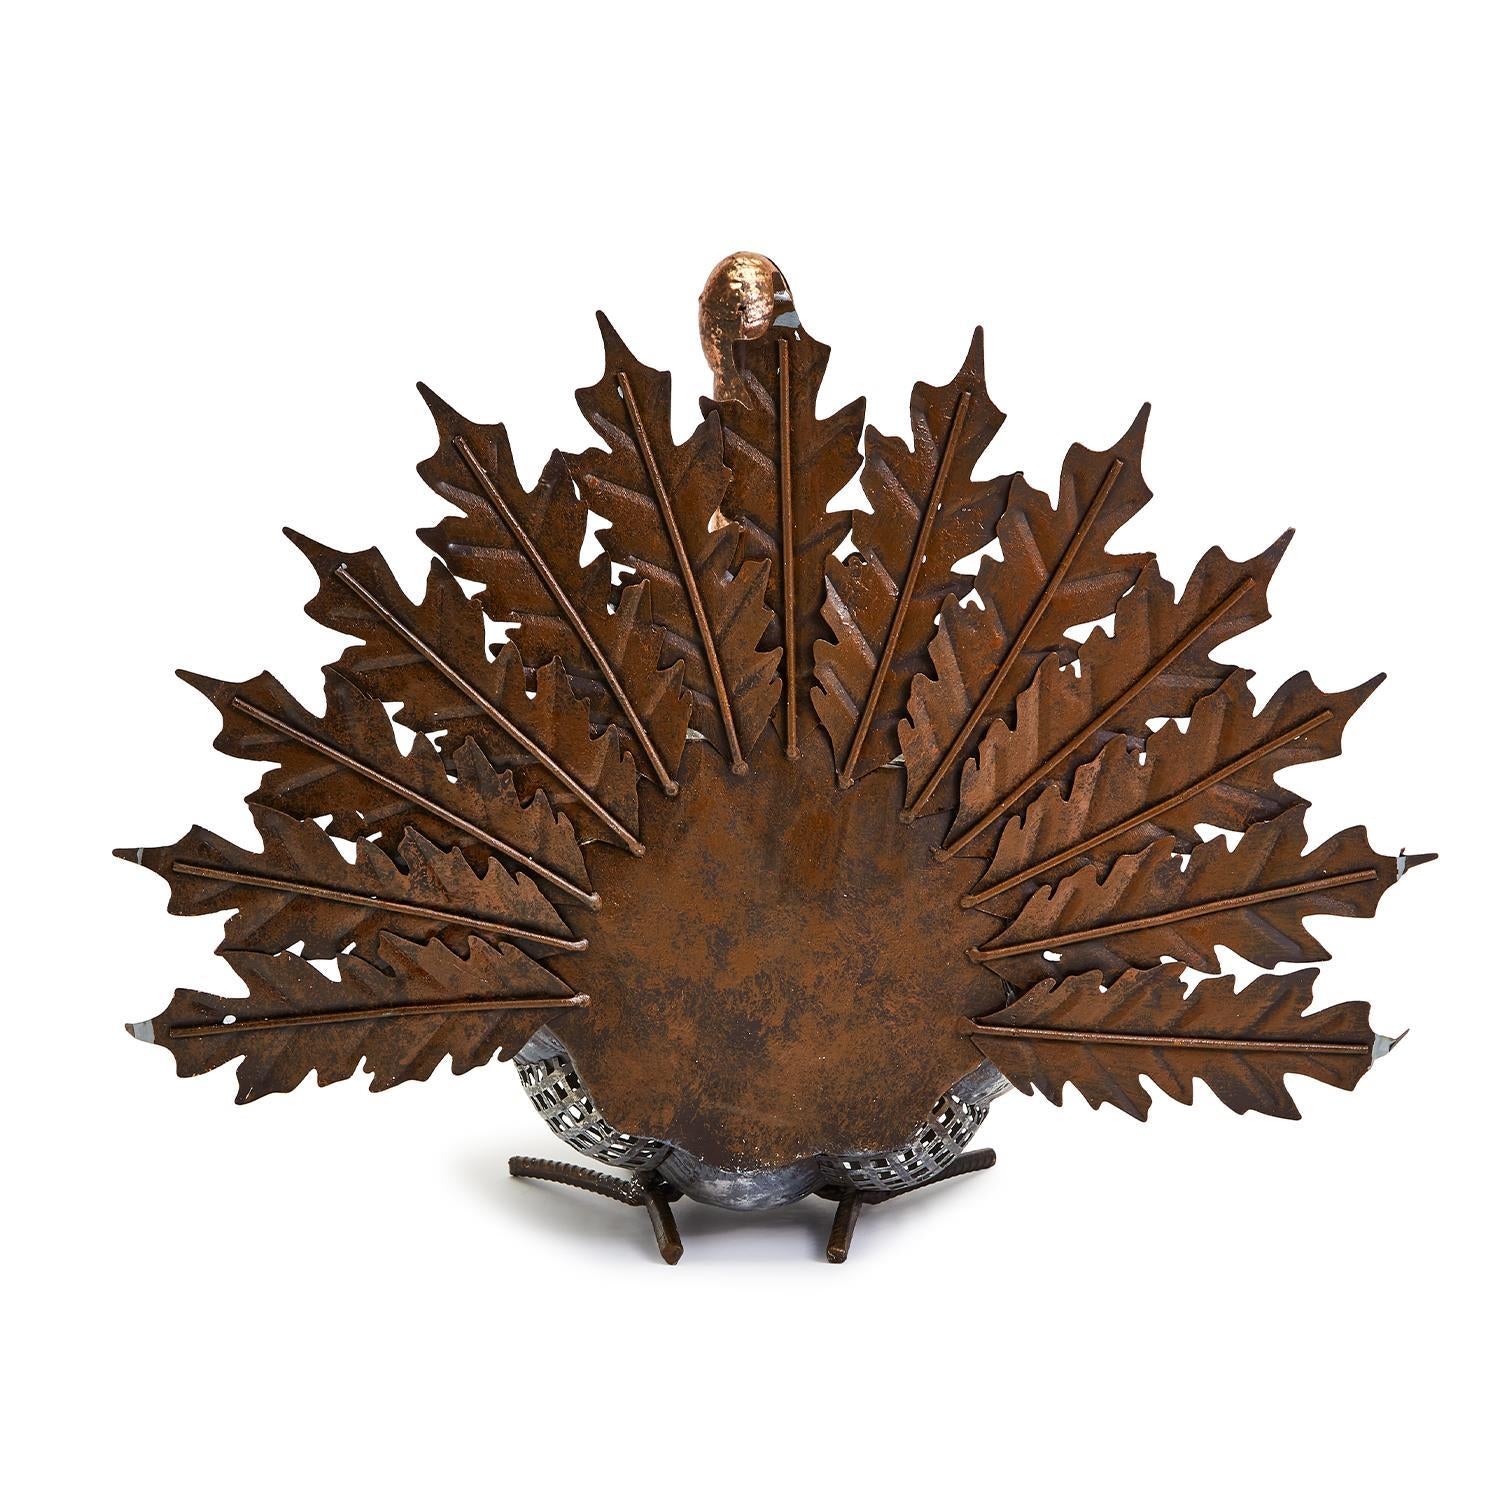 Hand-Crafted Galvanized Metal Turkey with Metallic Leaf Accent